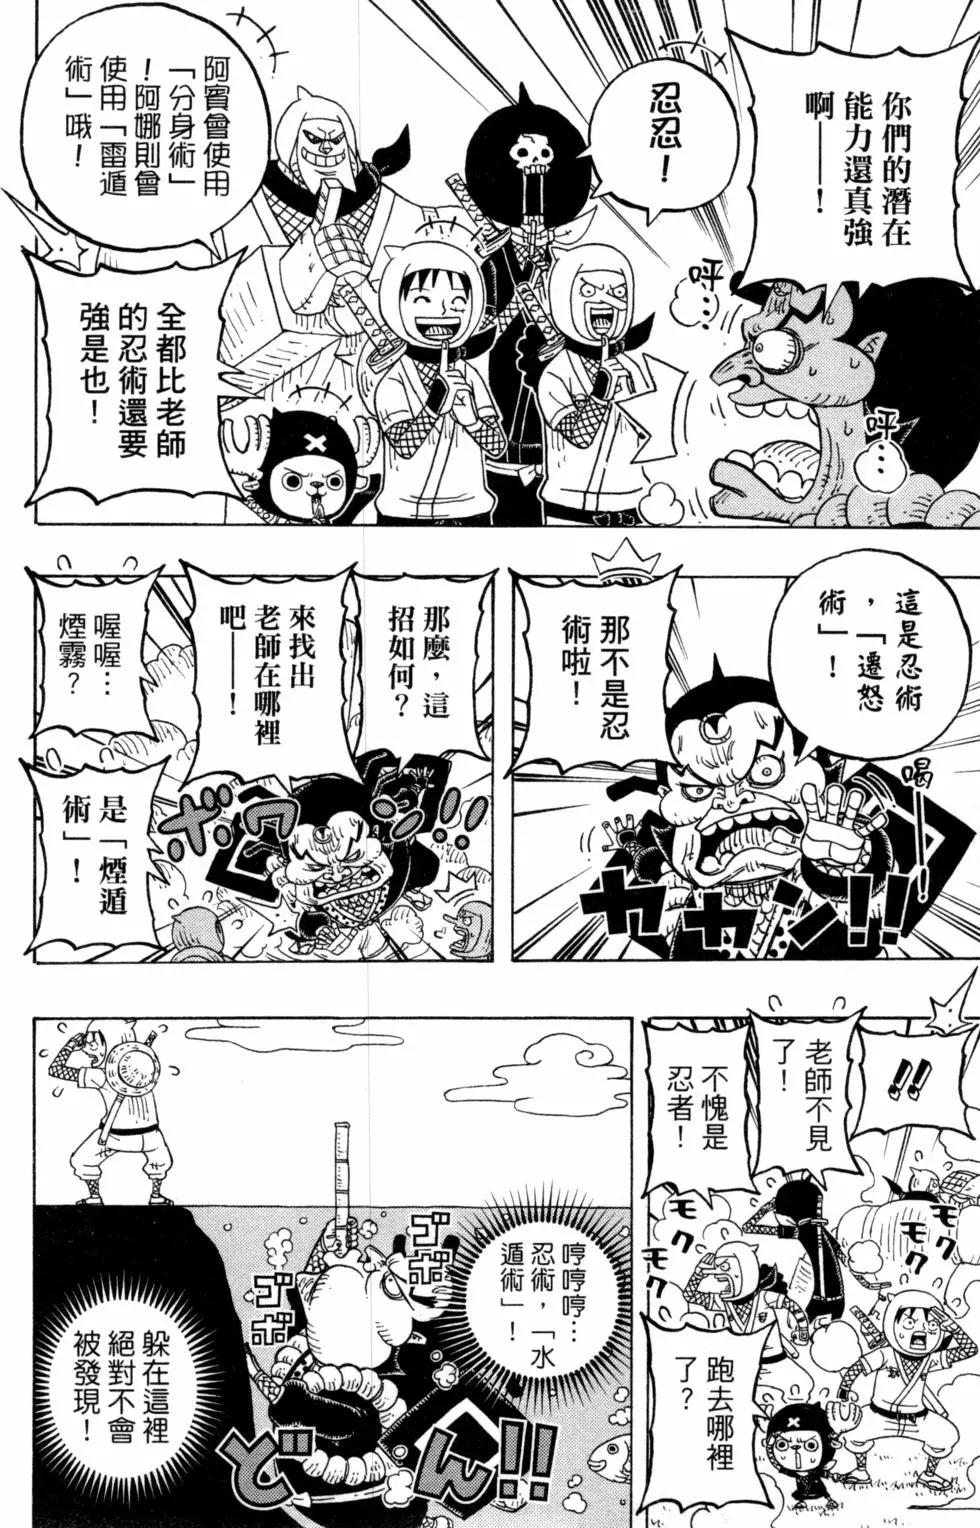 One piece party - 第06卷(1/4) - 7